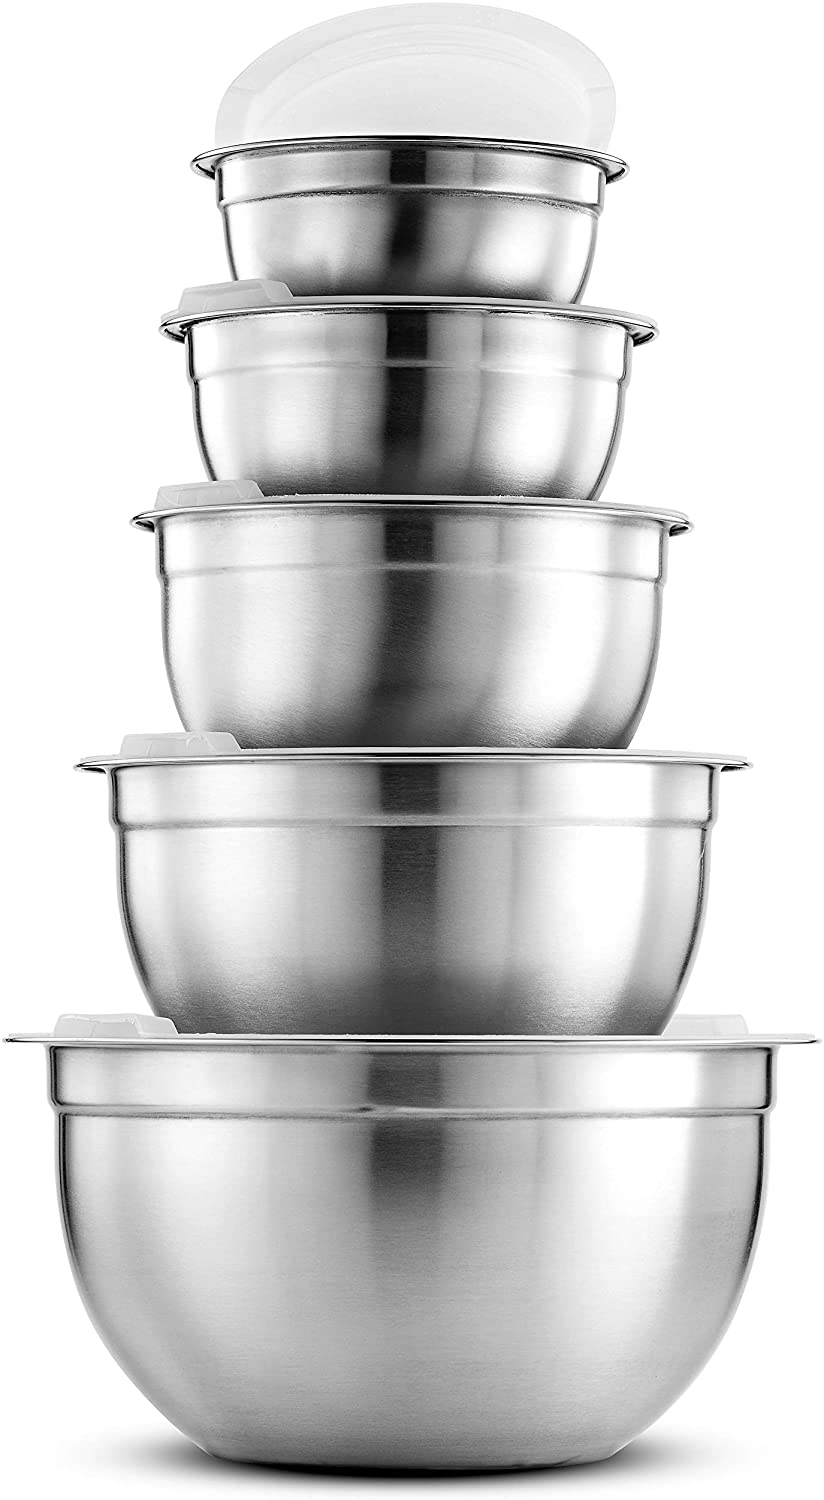 FineDine Premium Stainless Steel Mixing Bowls with Airtight Lids – Set of 5